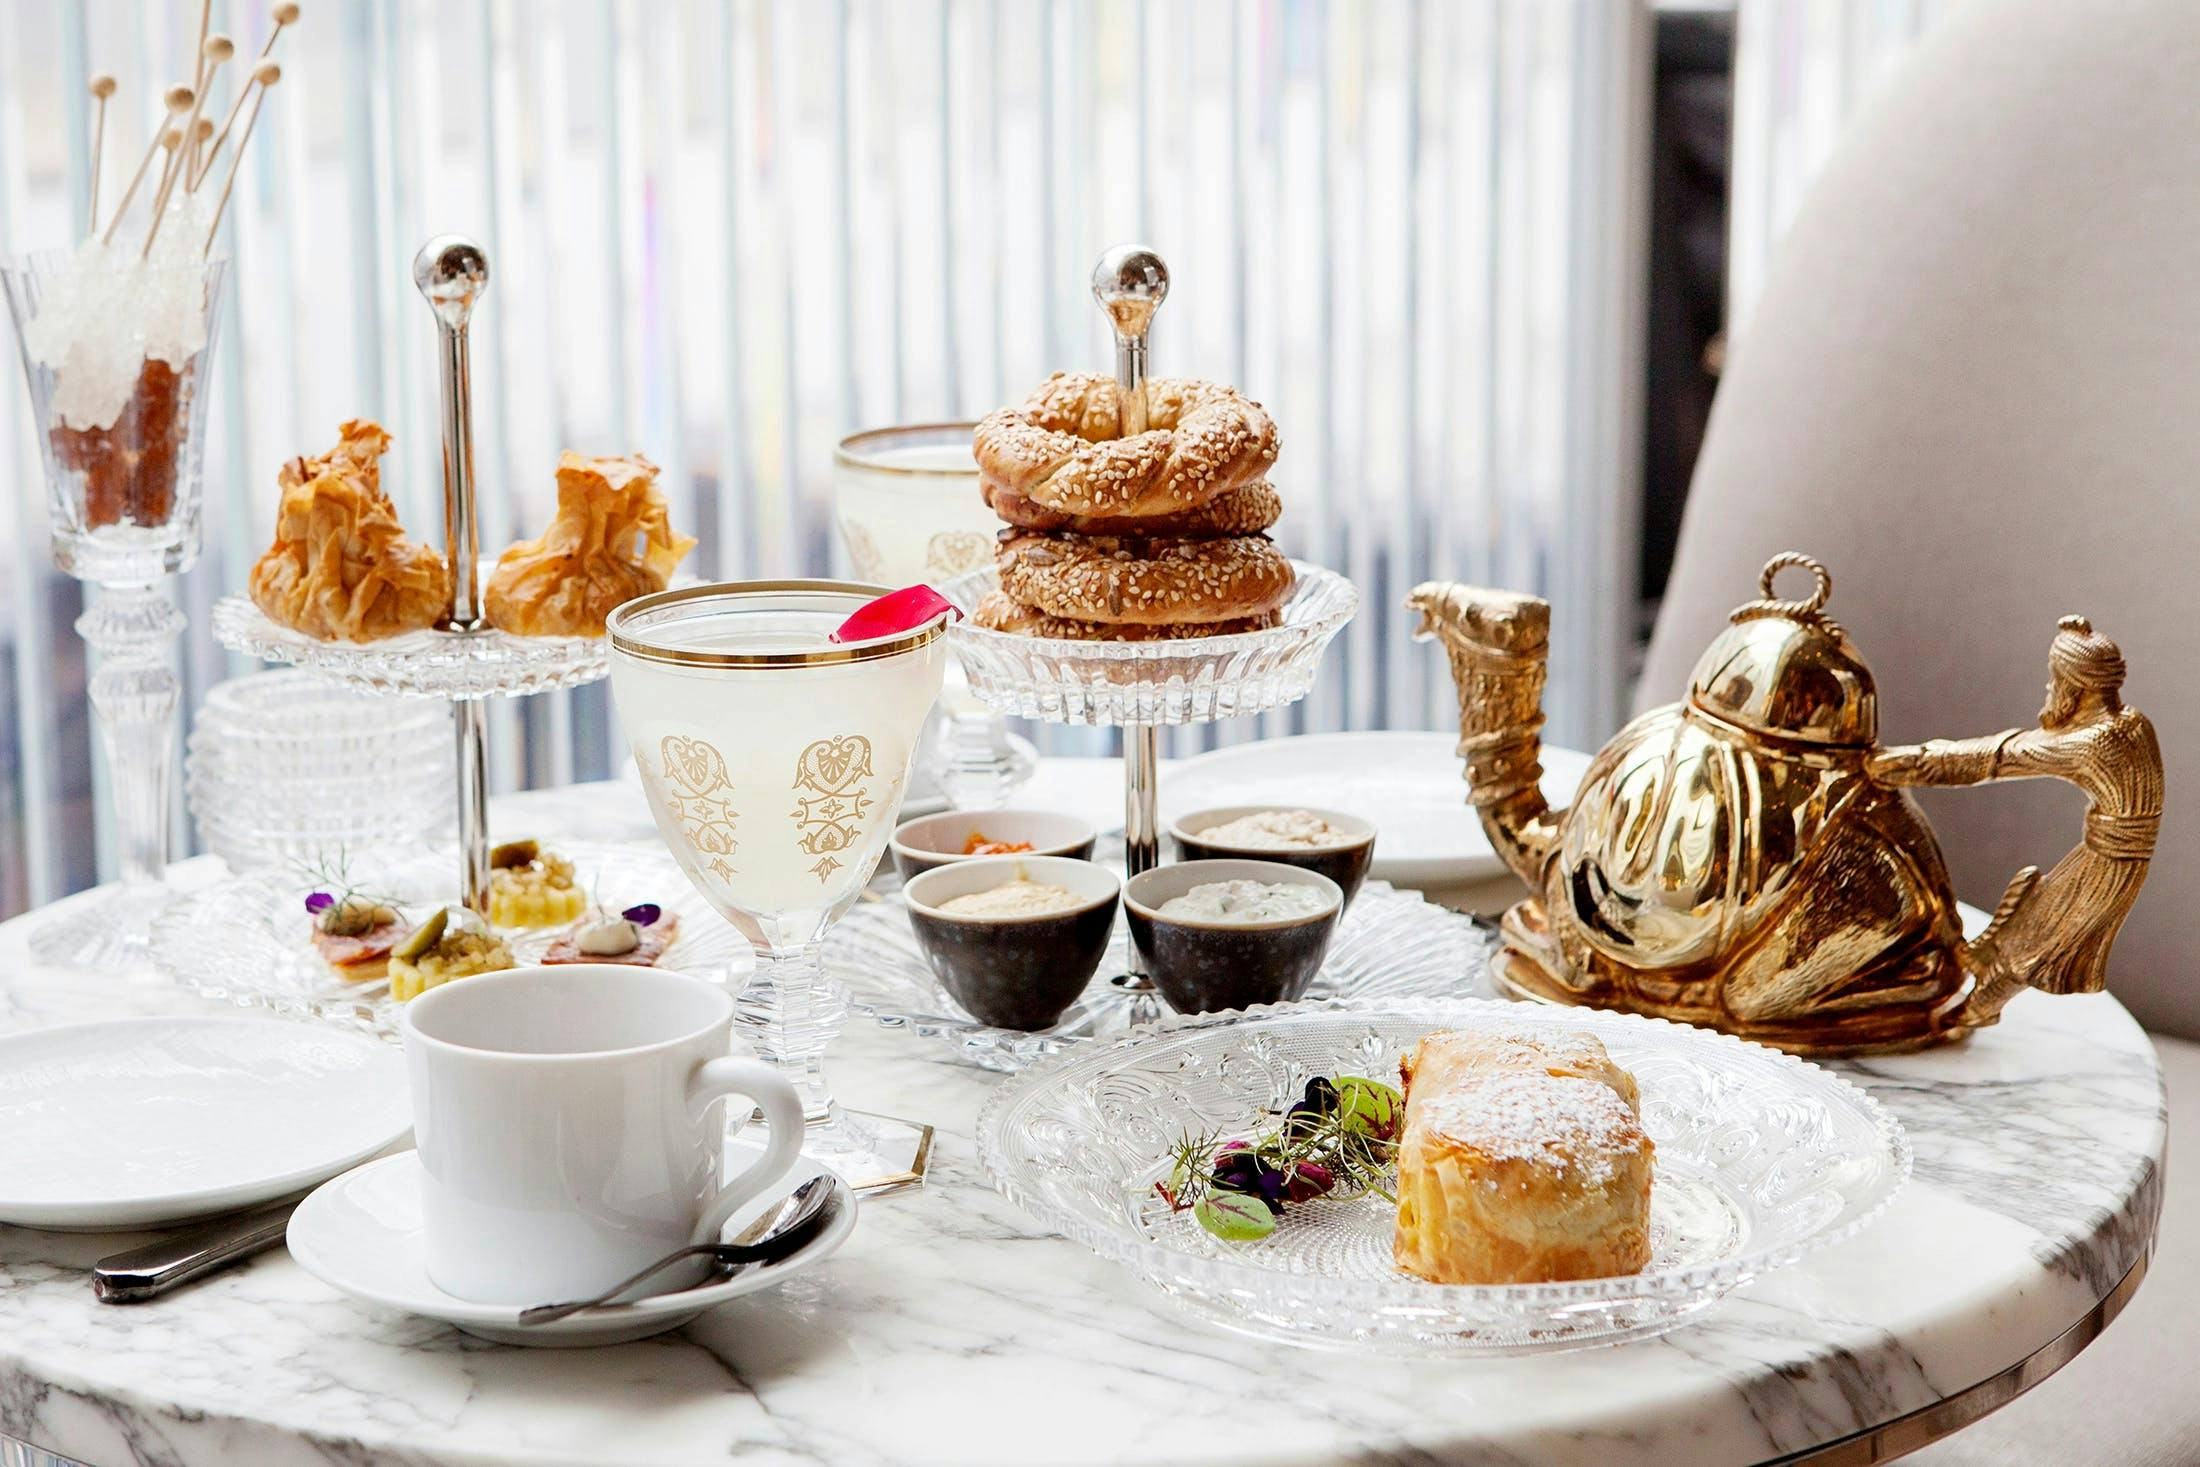 Afternoon tea at the Baccarat Hotel. Photo courtesy of the Baccarat.